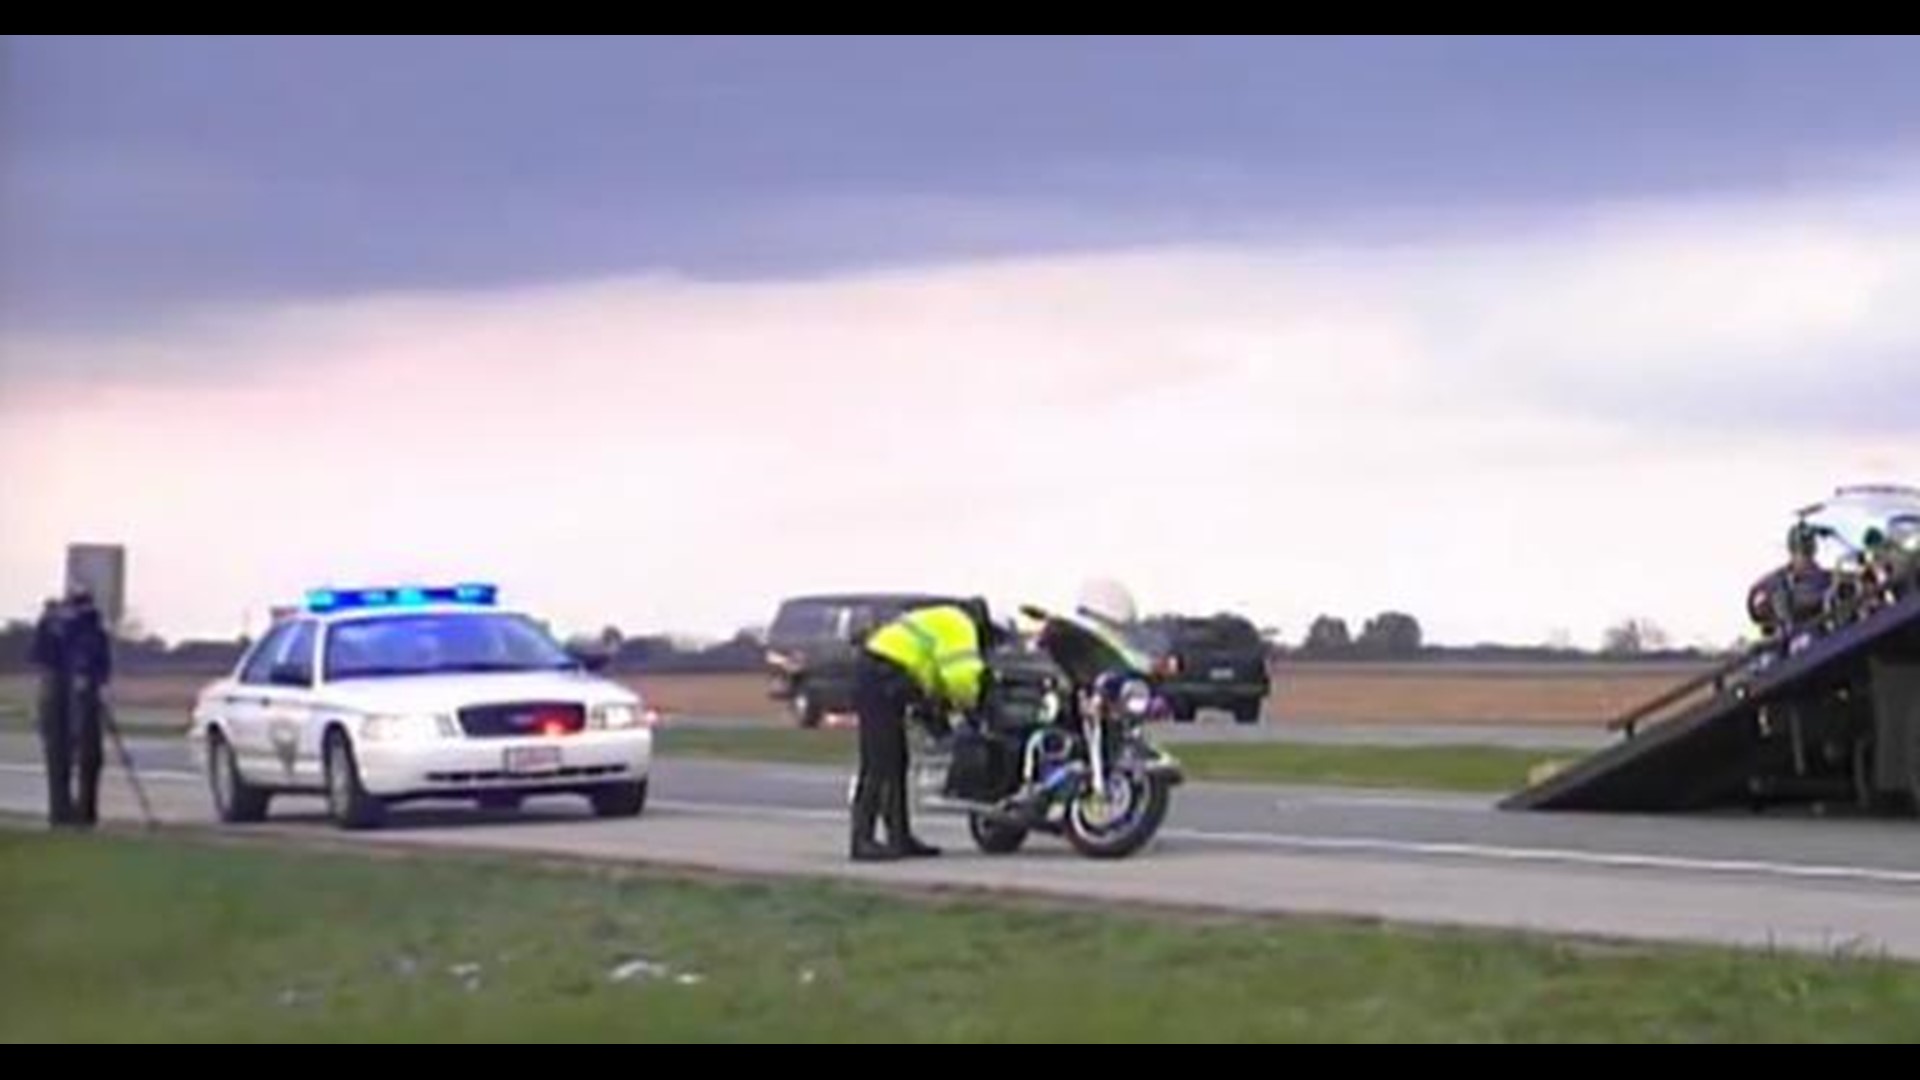 2 Motorcyclists Involved In Michelle Obama's Motorcade Escort Injured In Crash Along U.S. 36